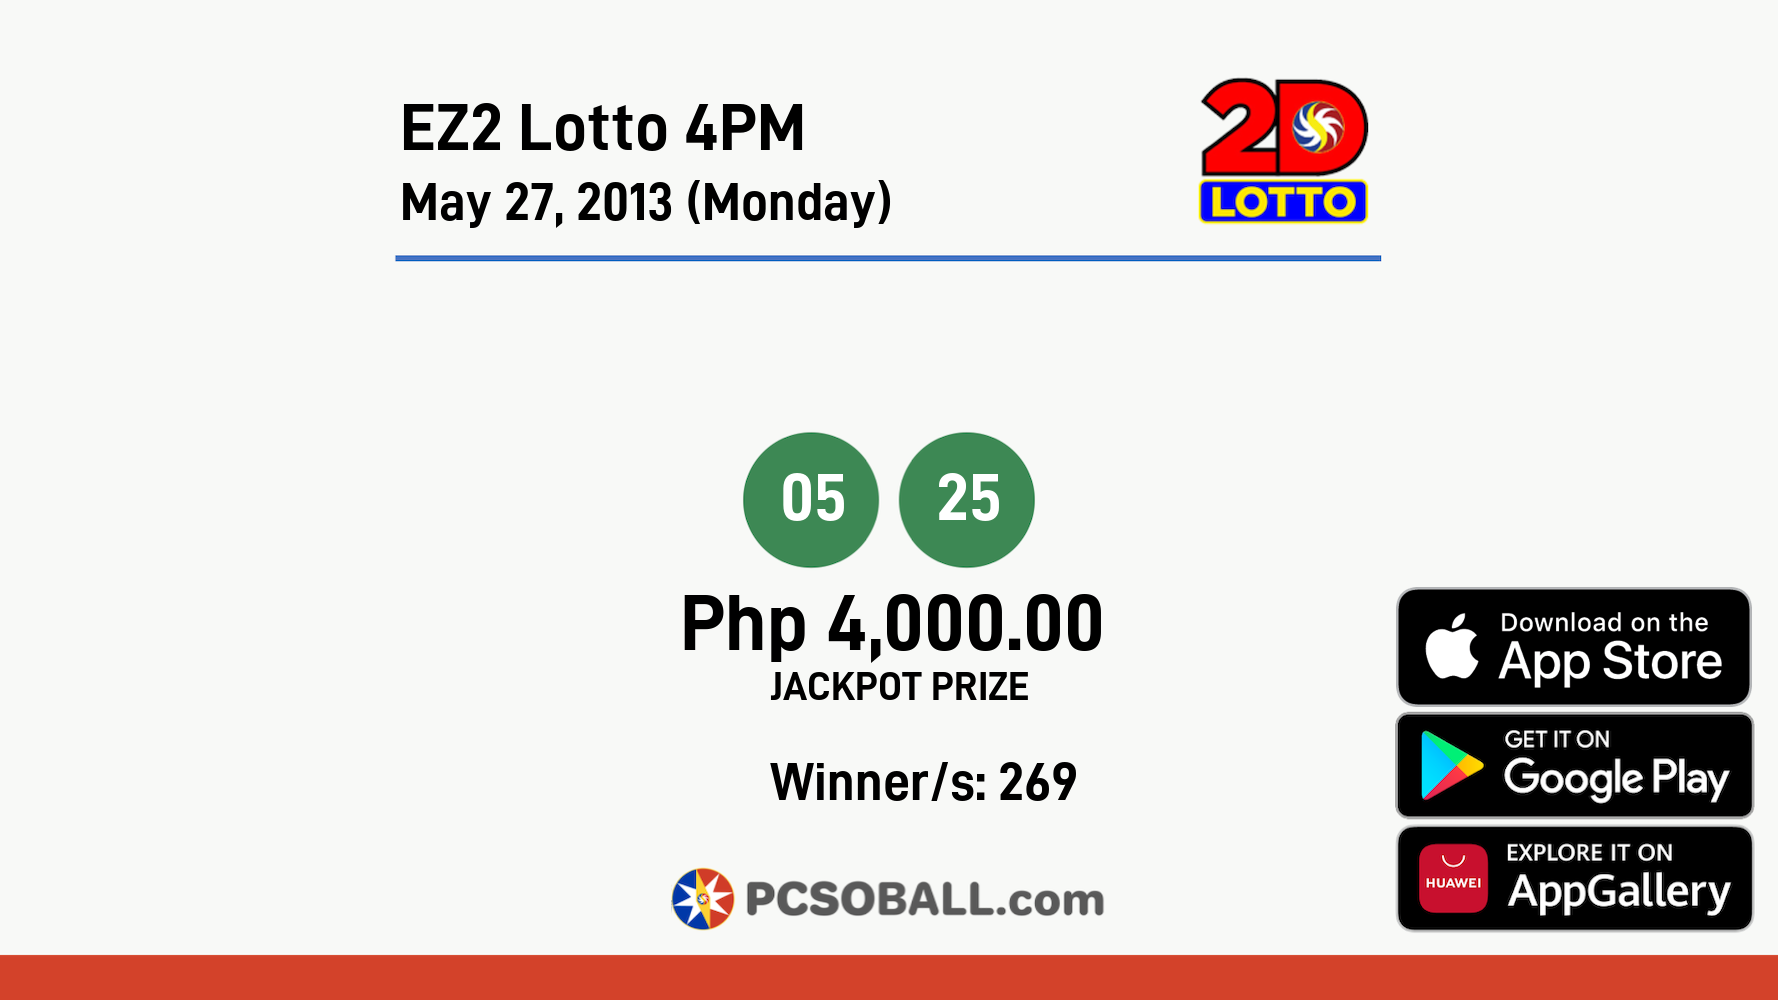 EZ2 Lotto 4PM May 27, 2013 (Monday) Result